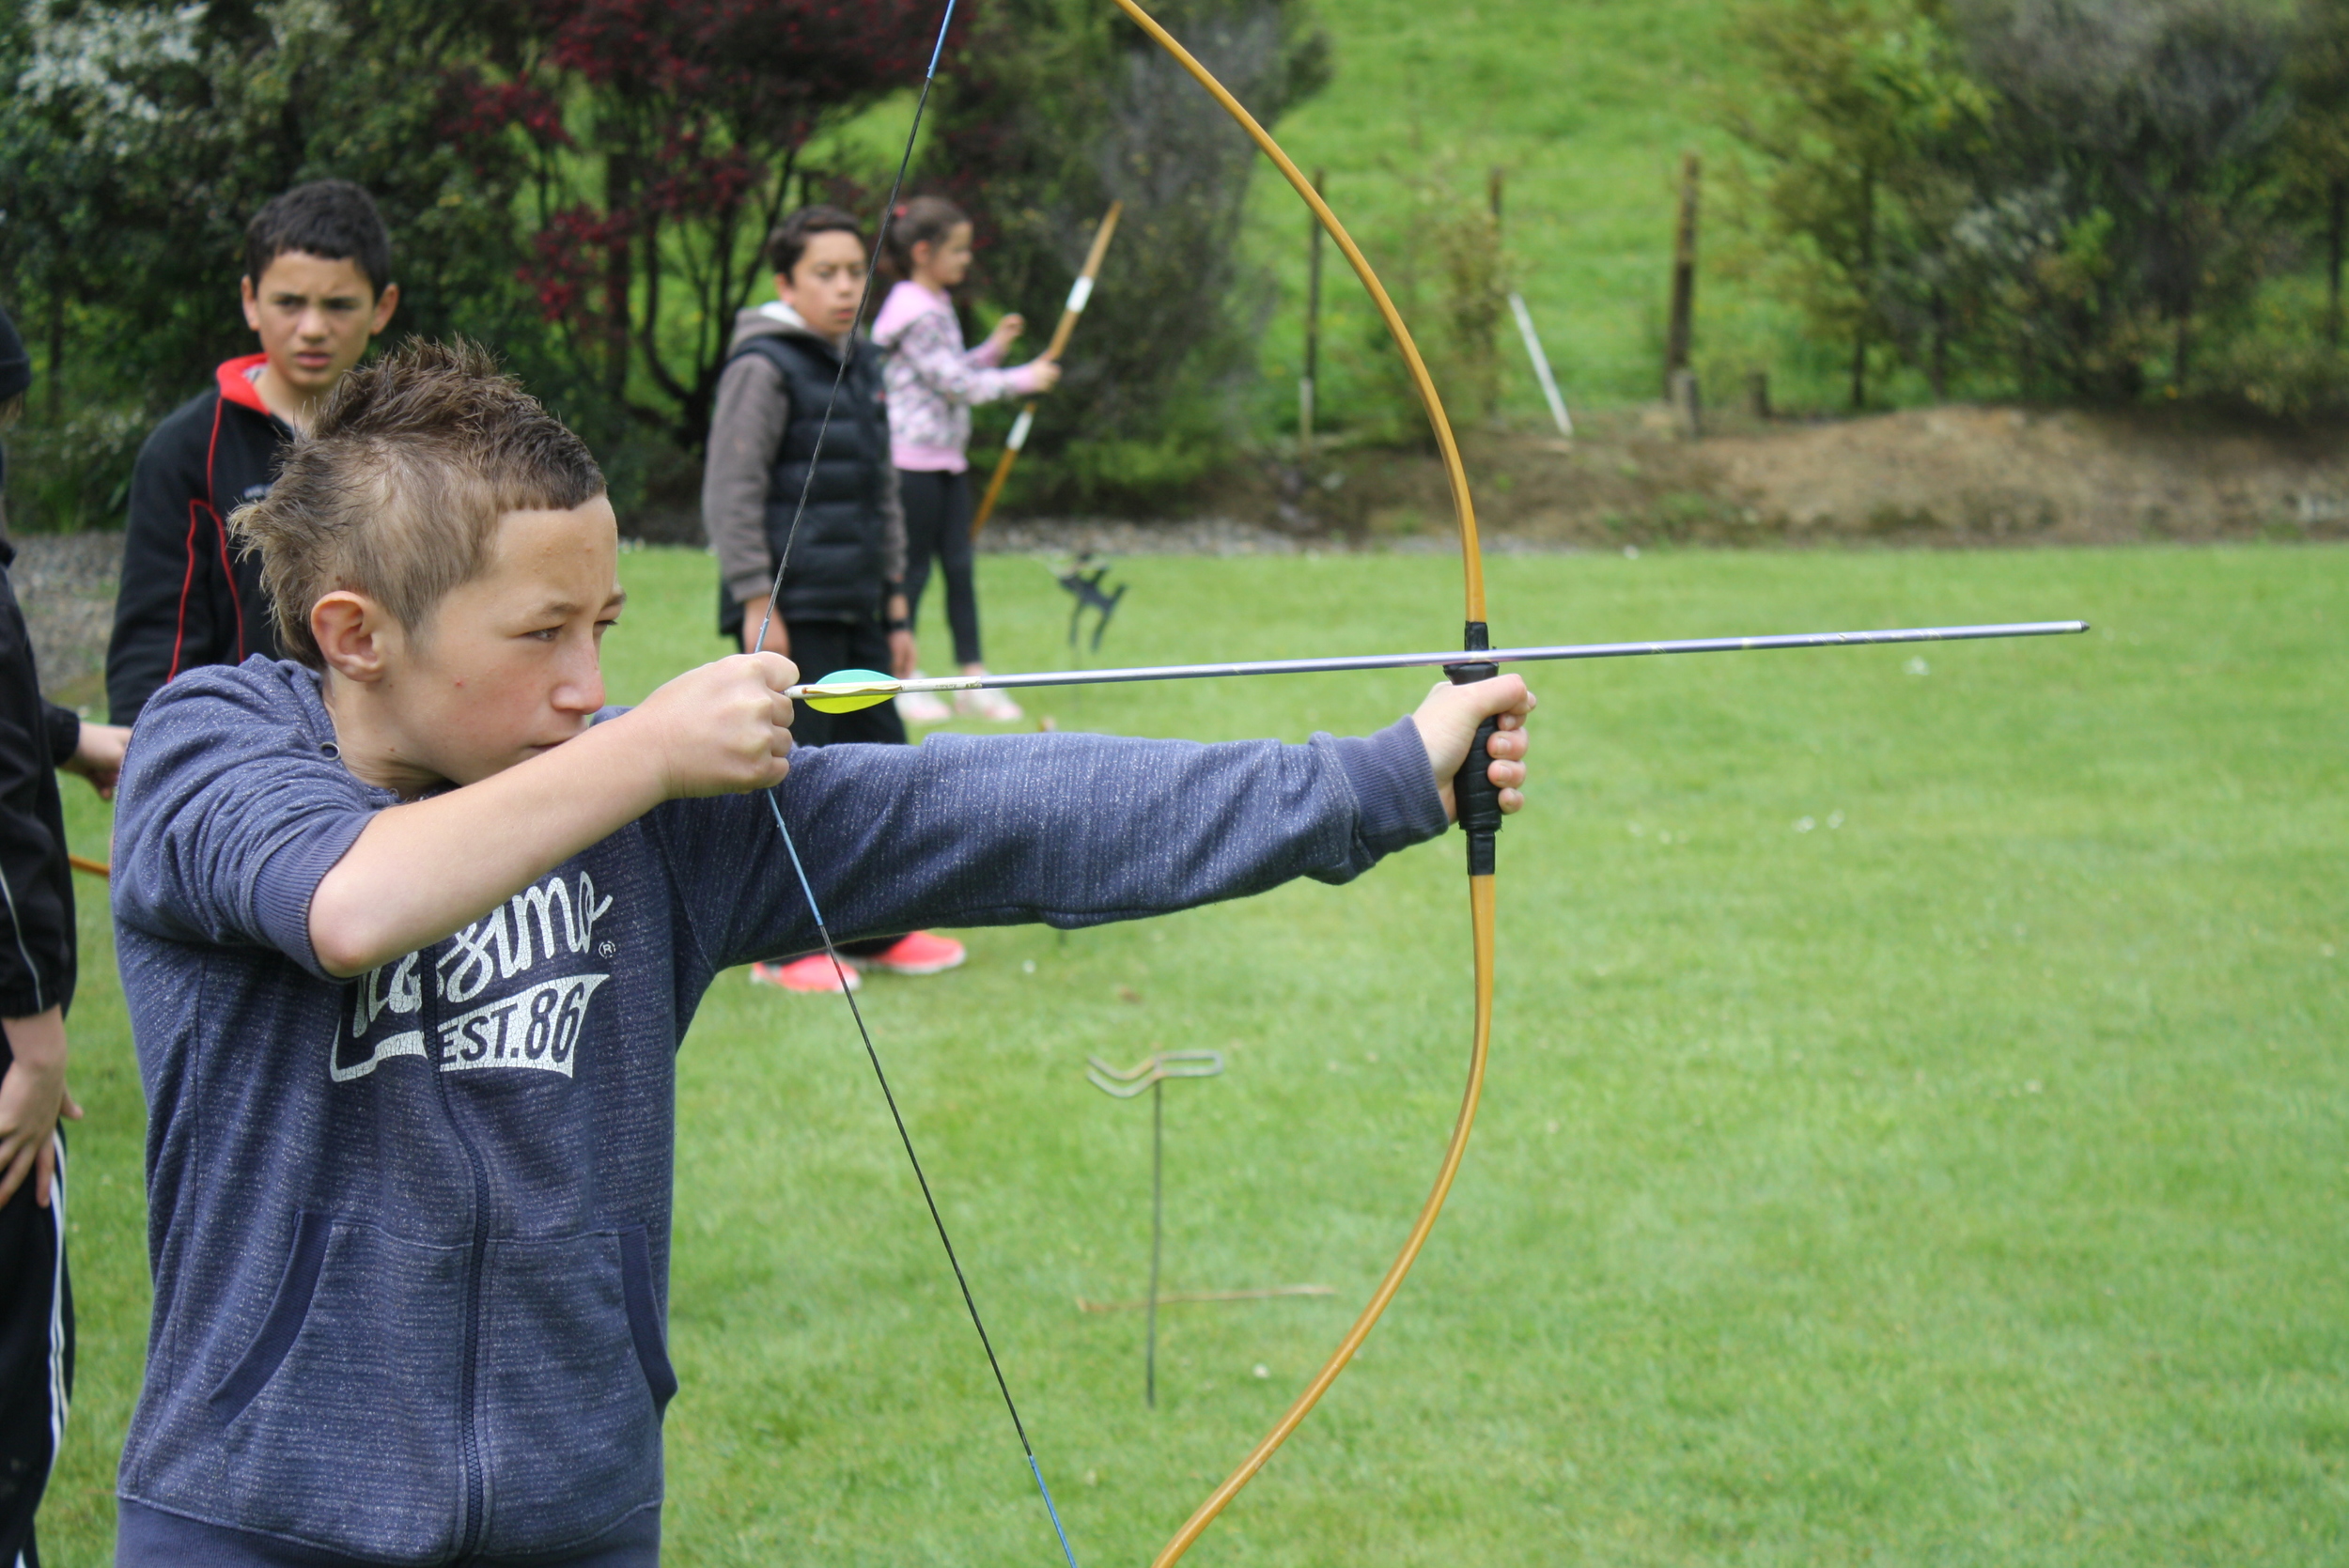   Archery is one of our most popular activities. Four targets are available with full sets of bows and arrows.  